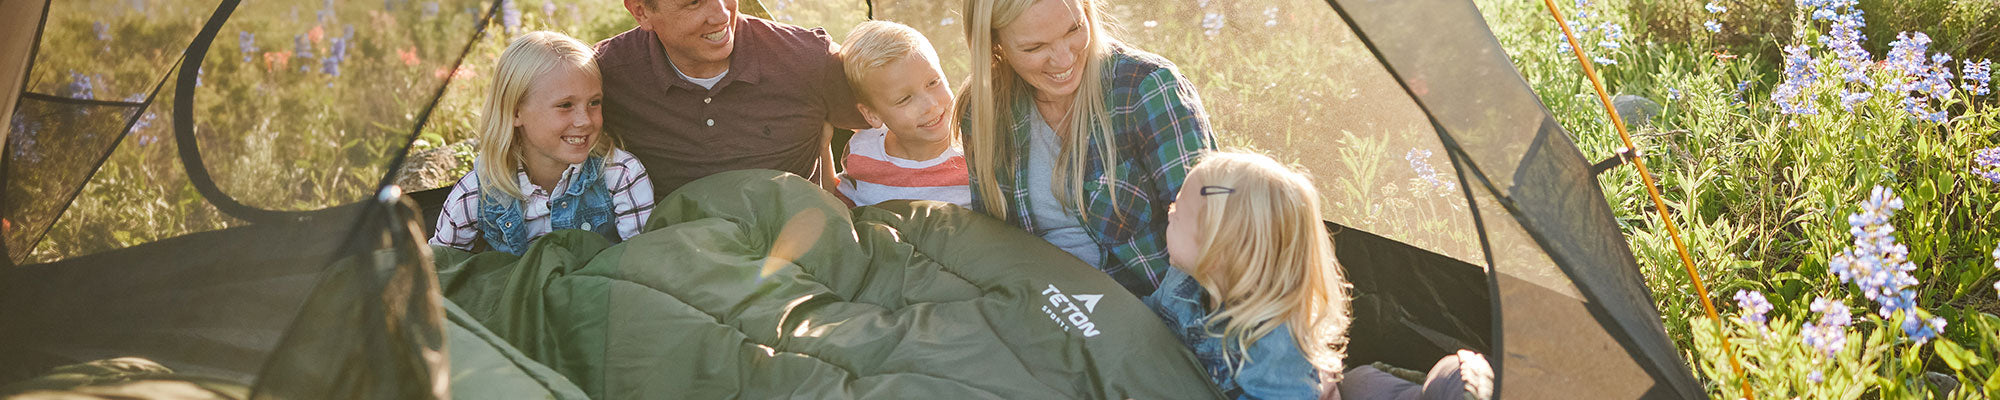 A family snuggles together in their Celsius Mammoth sleeping bag.